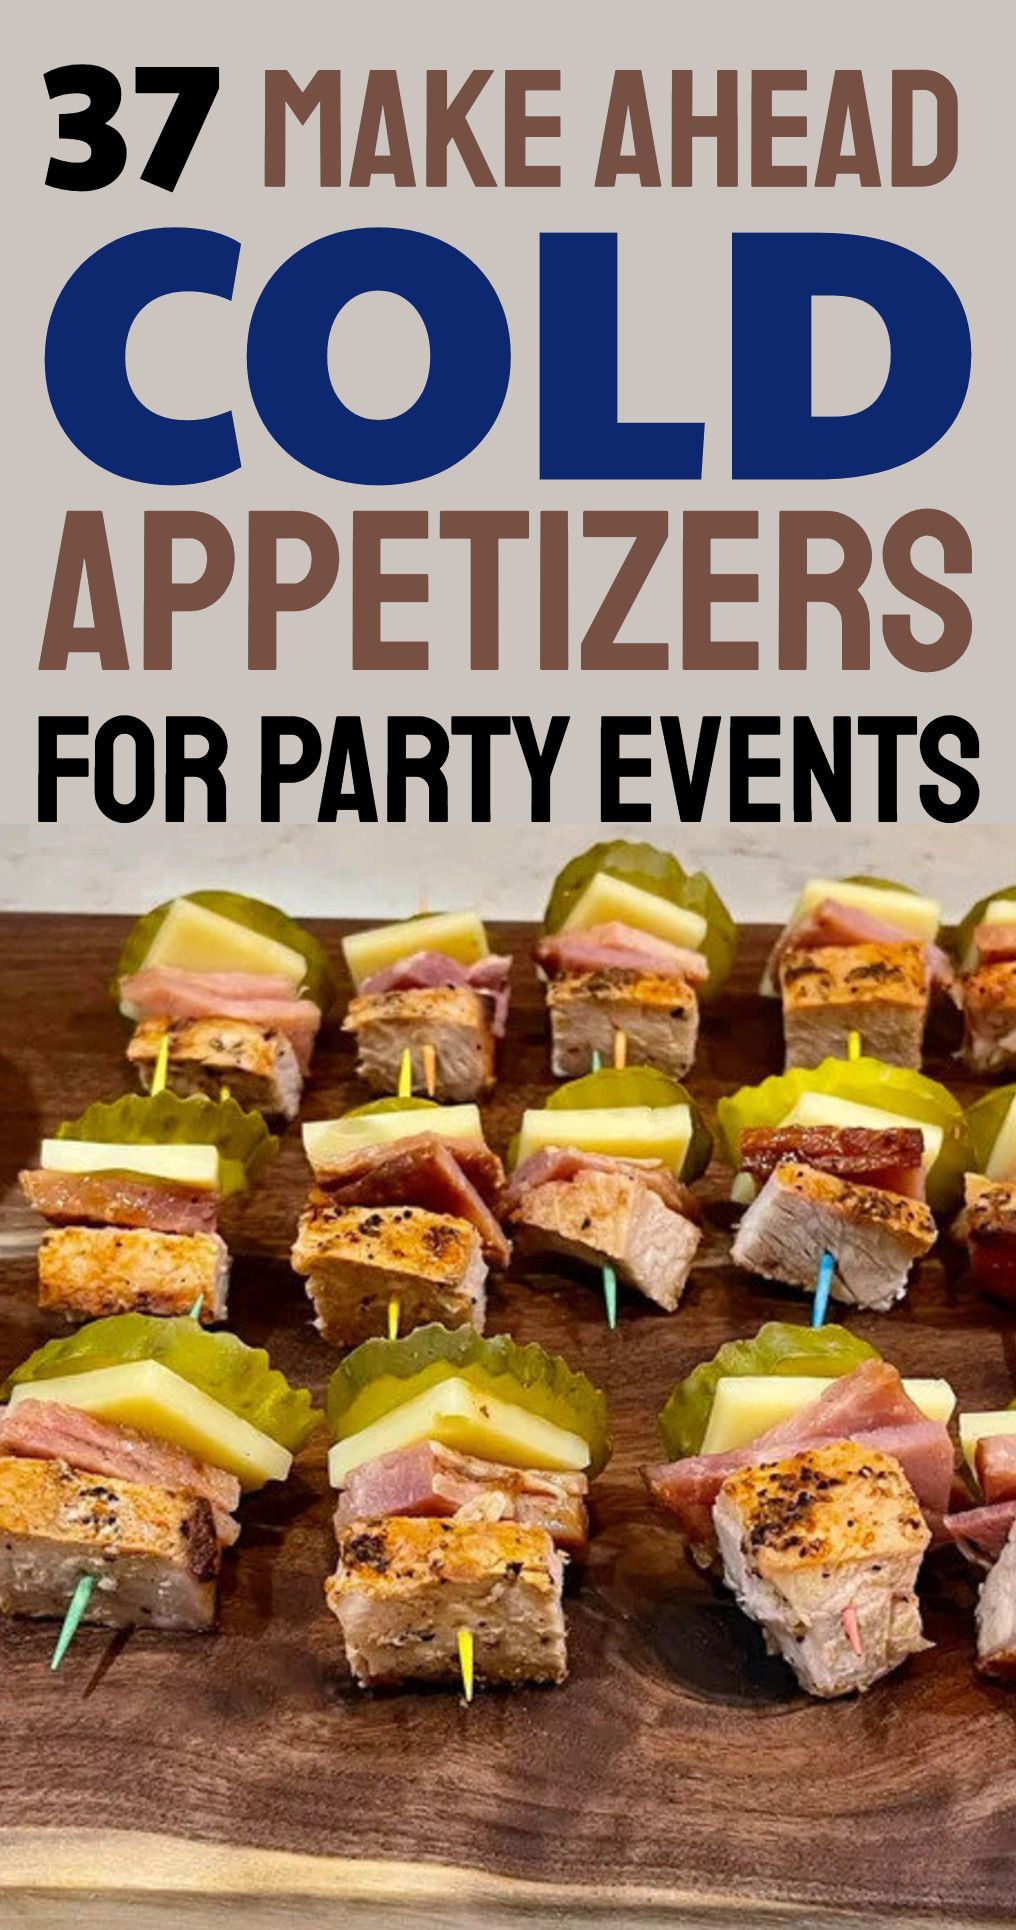 make ahead cold appetizers for party events